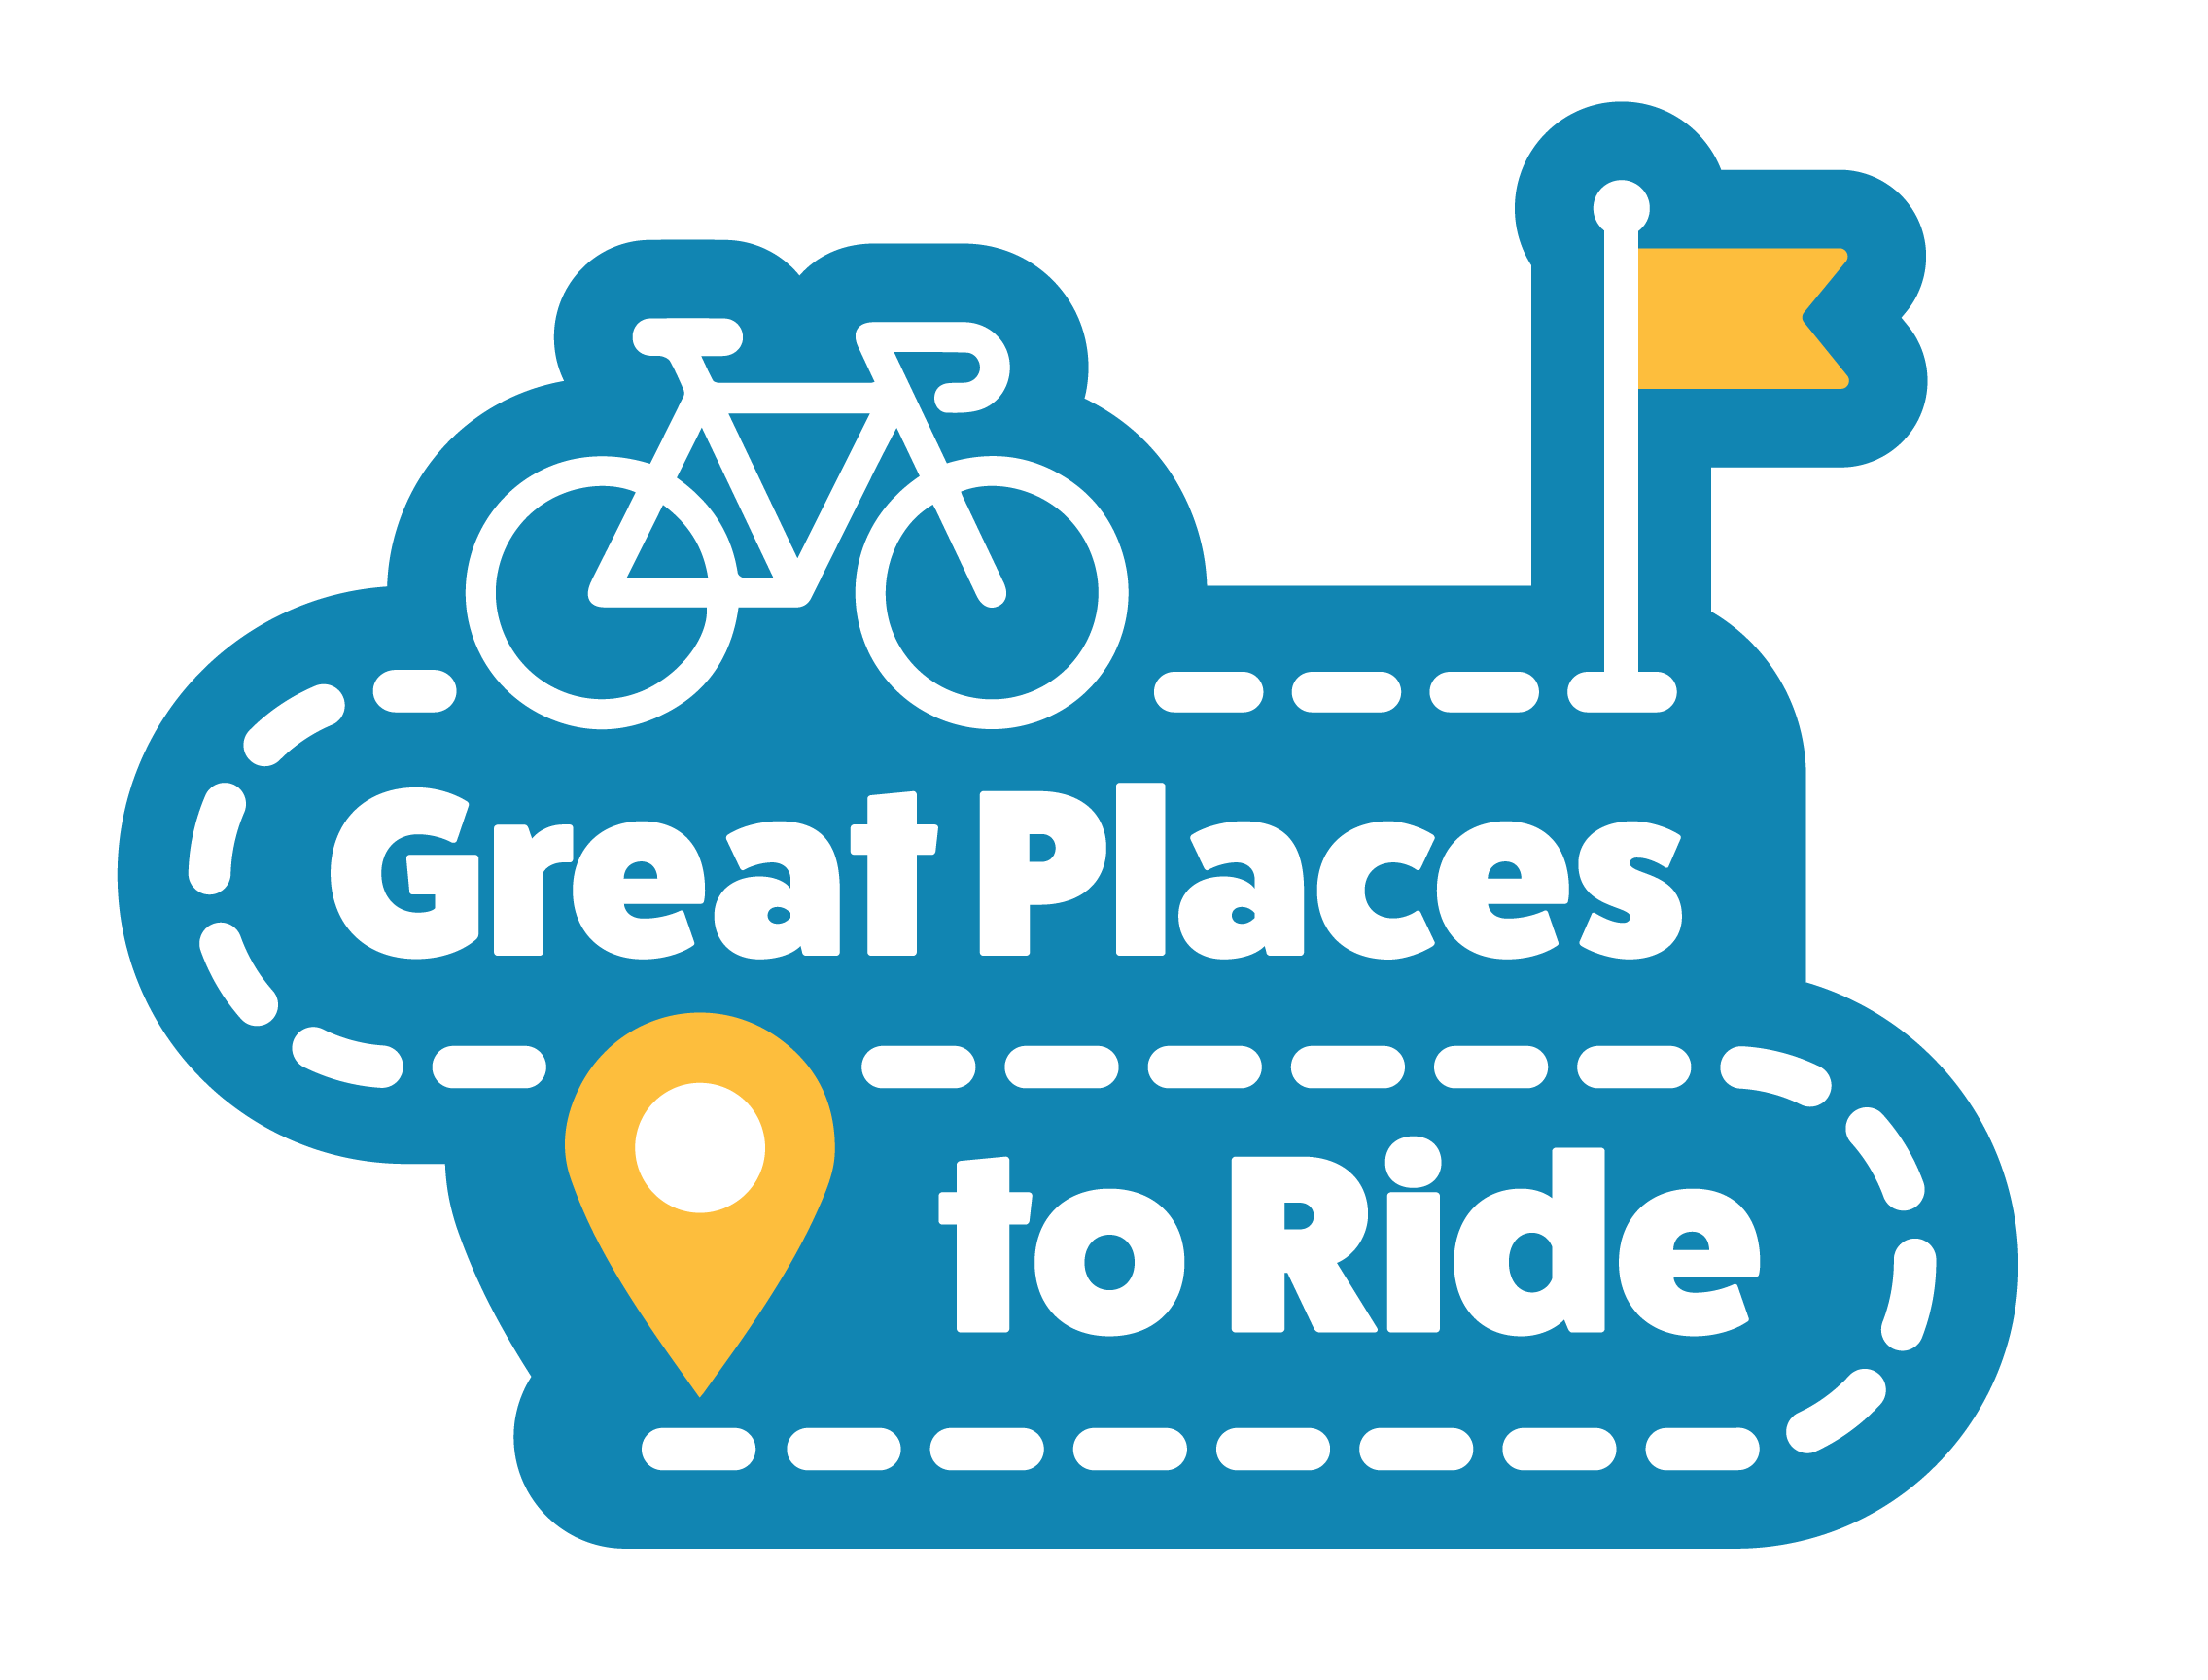 Great Places to Ride